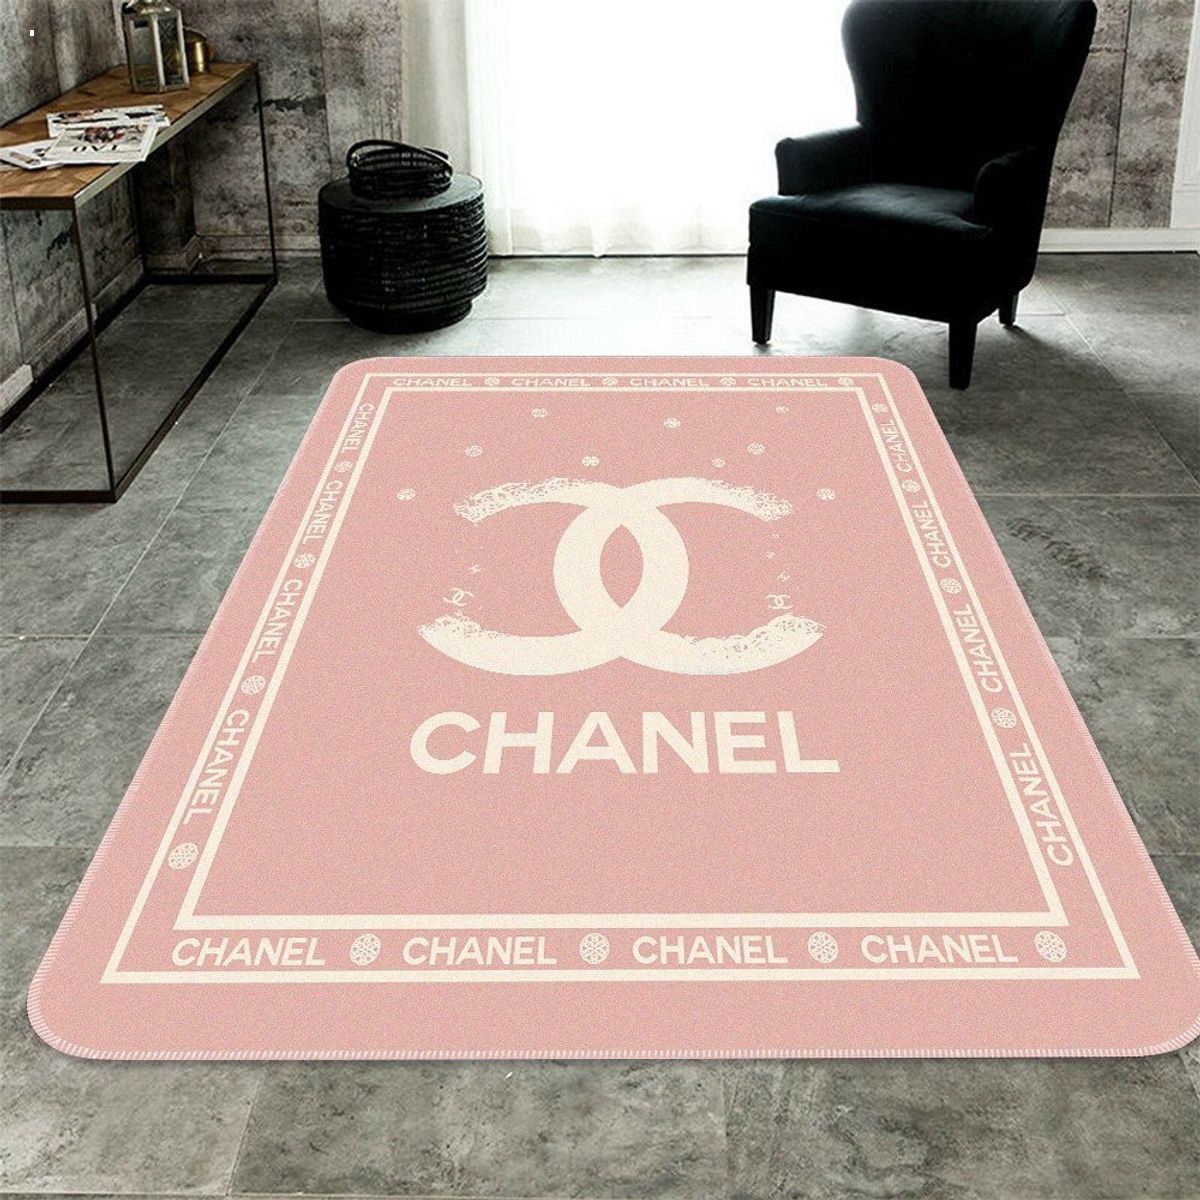 Chanel Pink Luxury Brand Carpet Rug Limited Edition